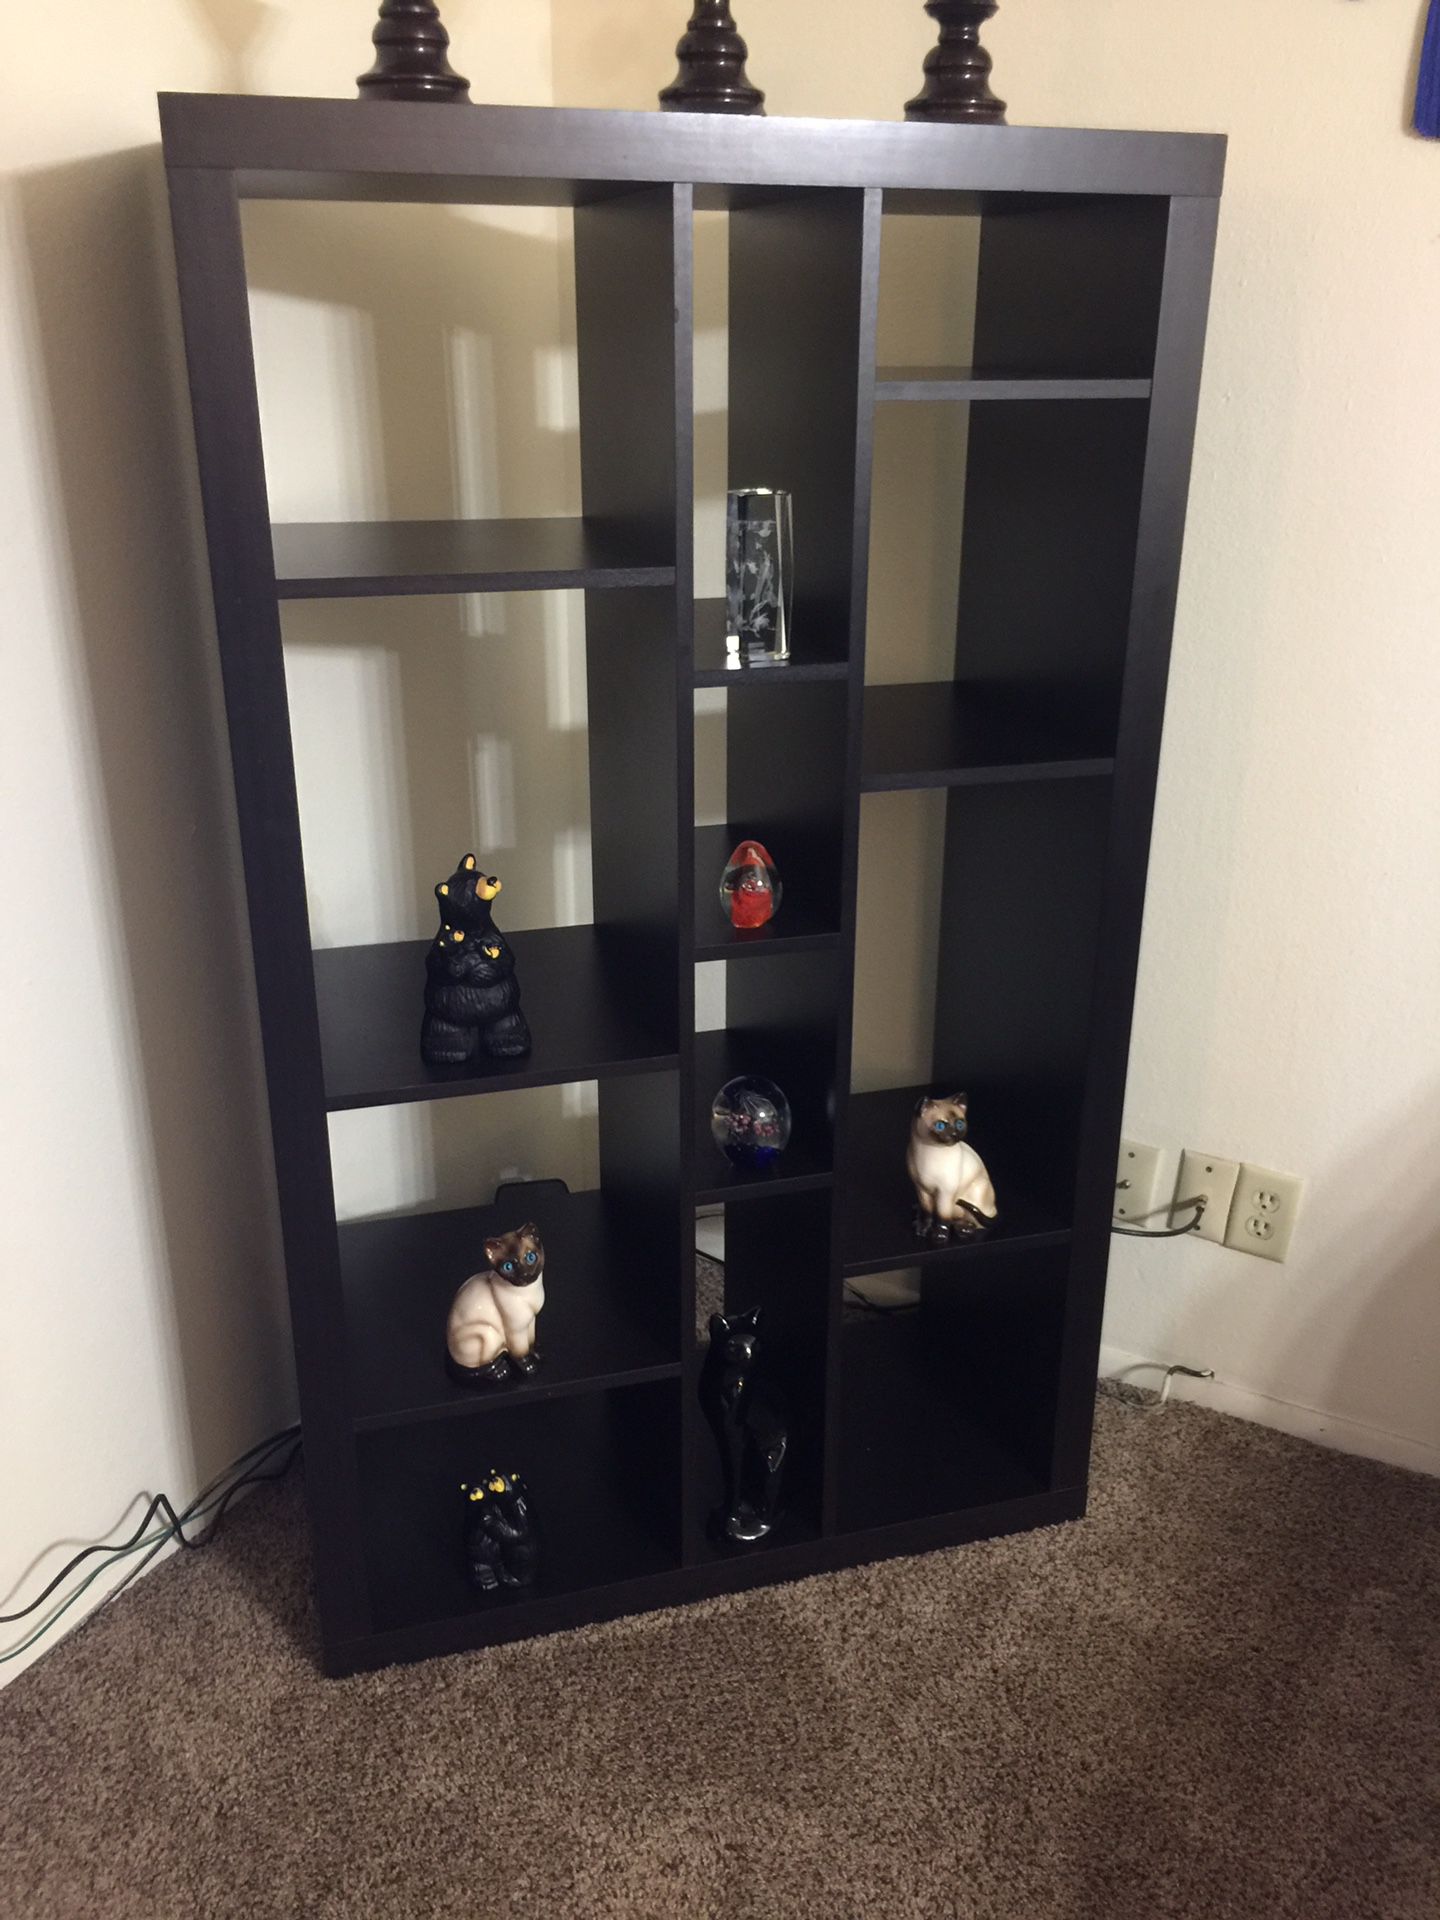 Shelf Black color You can use it as a tv stand